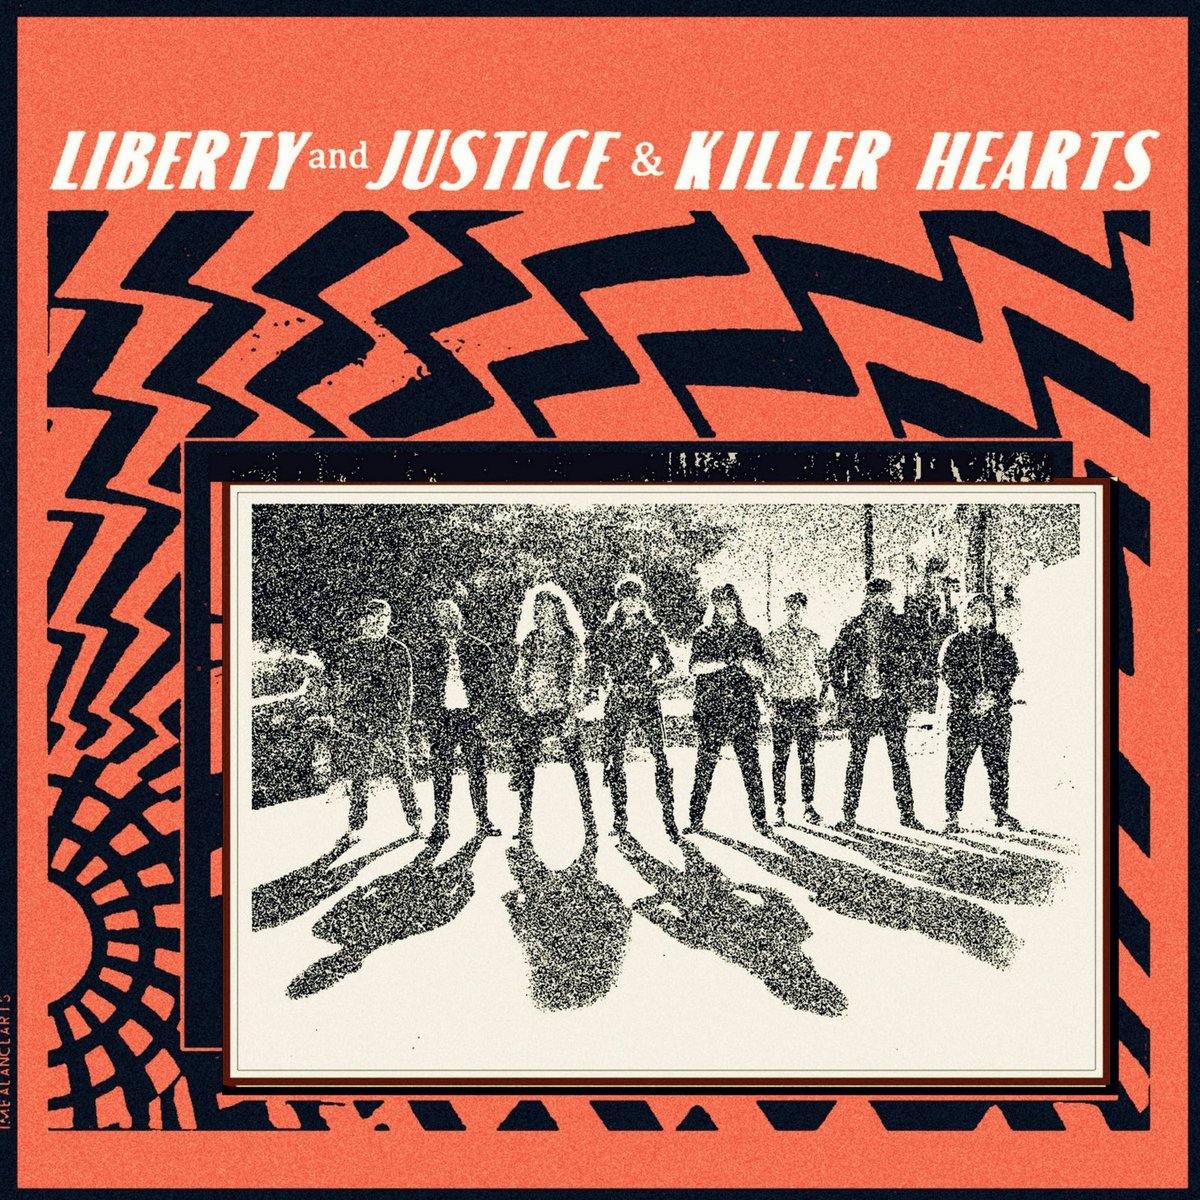 Buy – Liberty and Justice / Killer Hearts Split 7" – Band & Music Merch – Cold Cuts Merch